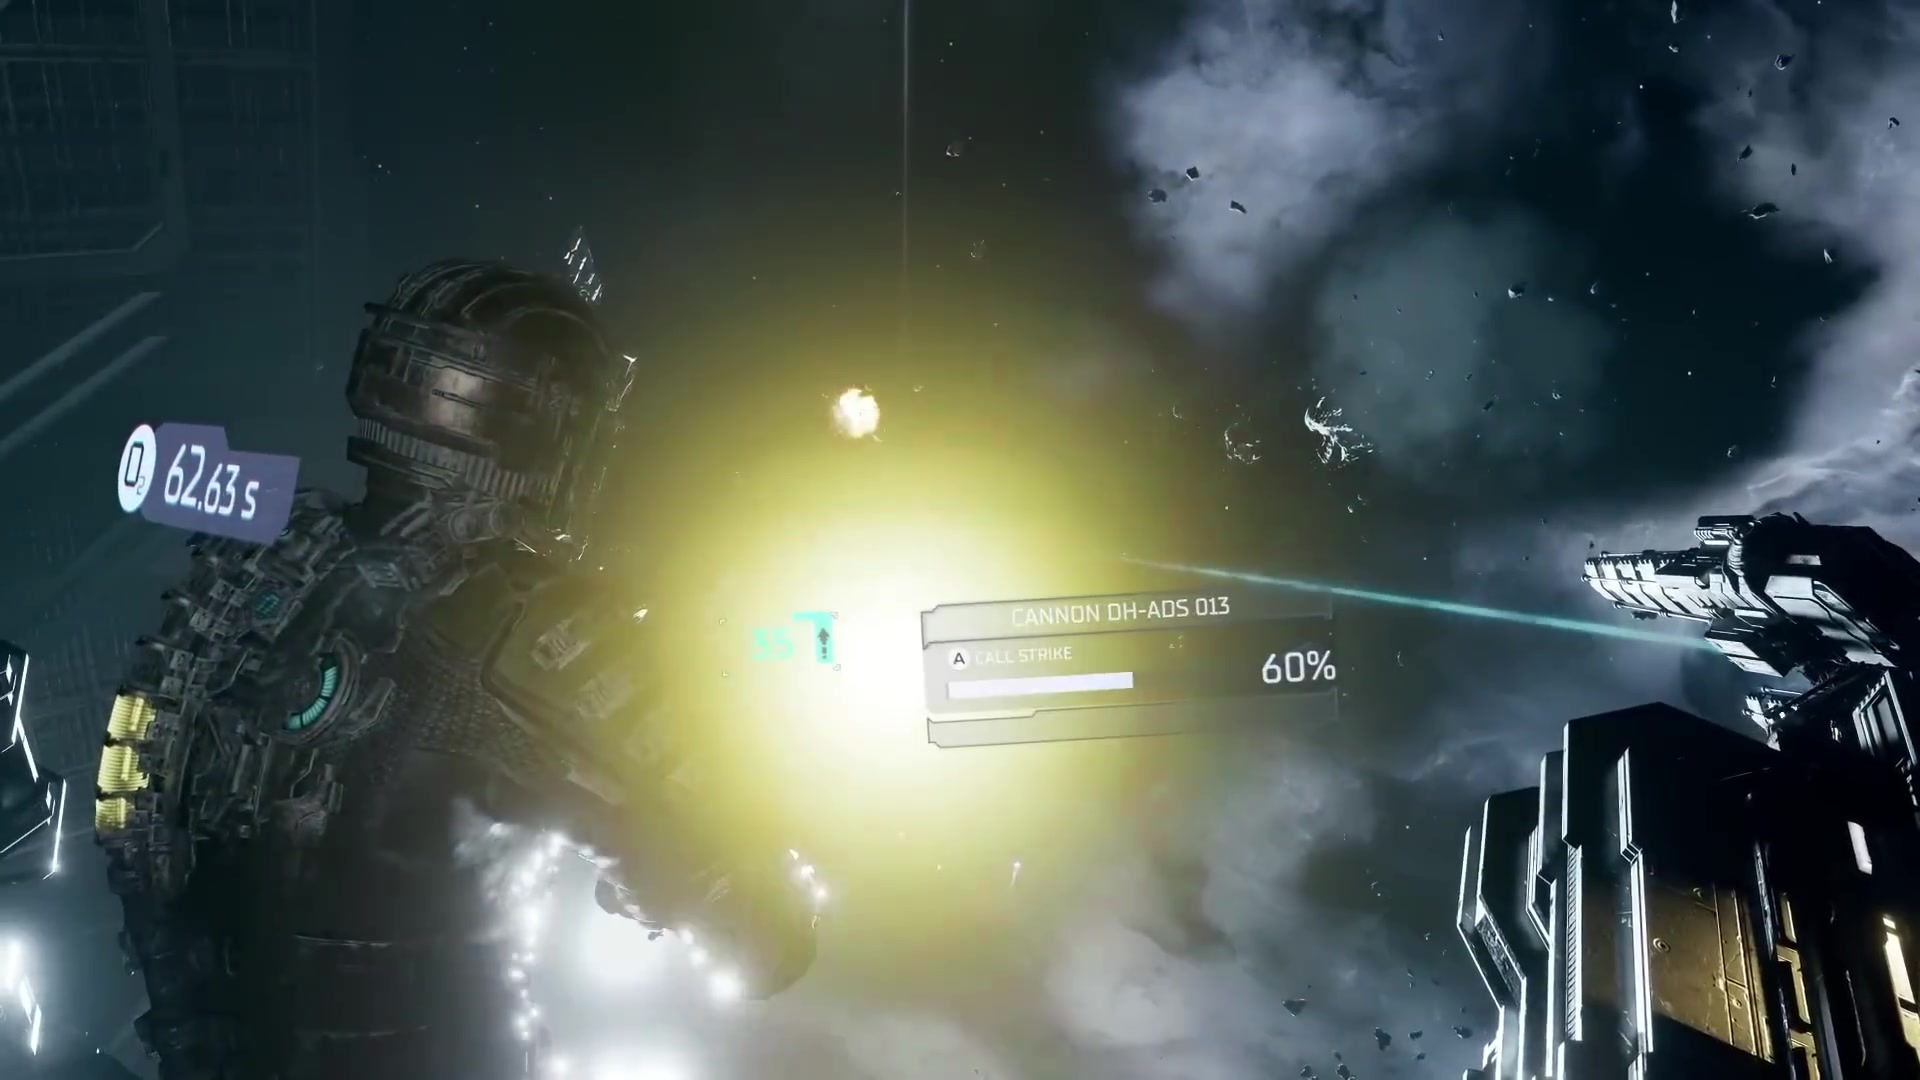 An exciting battle scene in a confining starship, with explosions and soaring rockets.